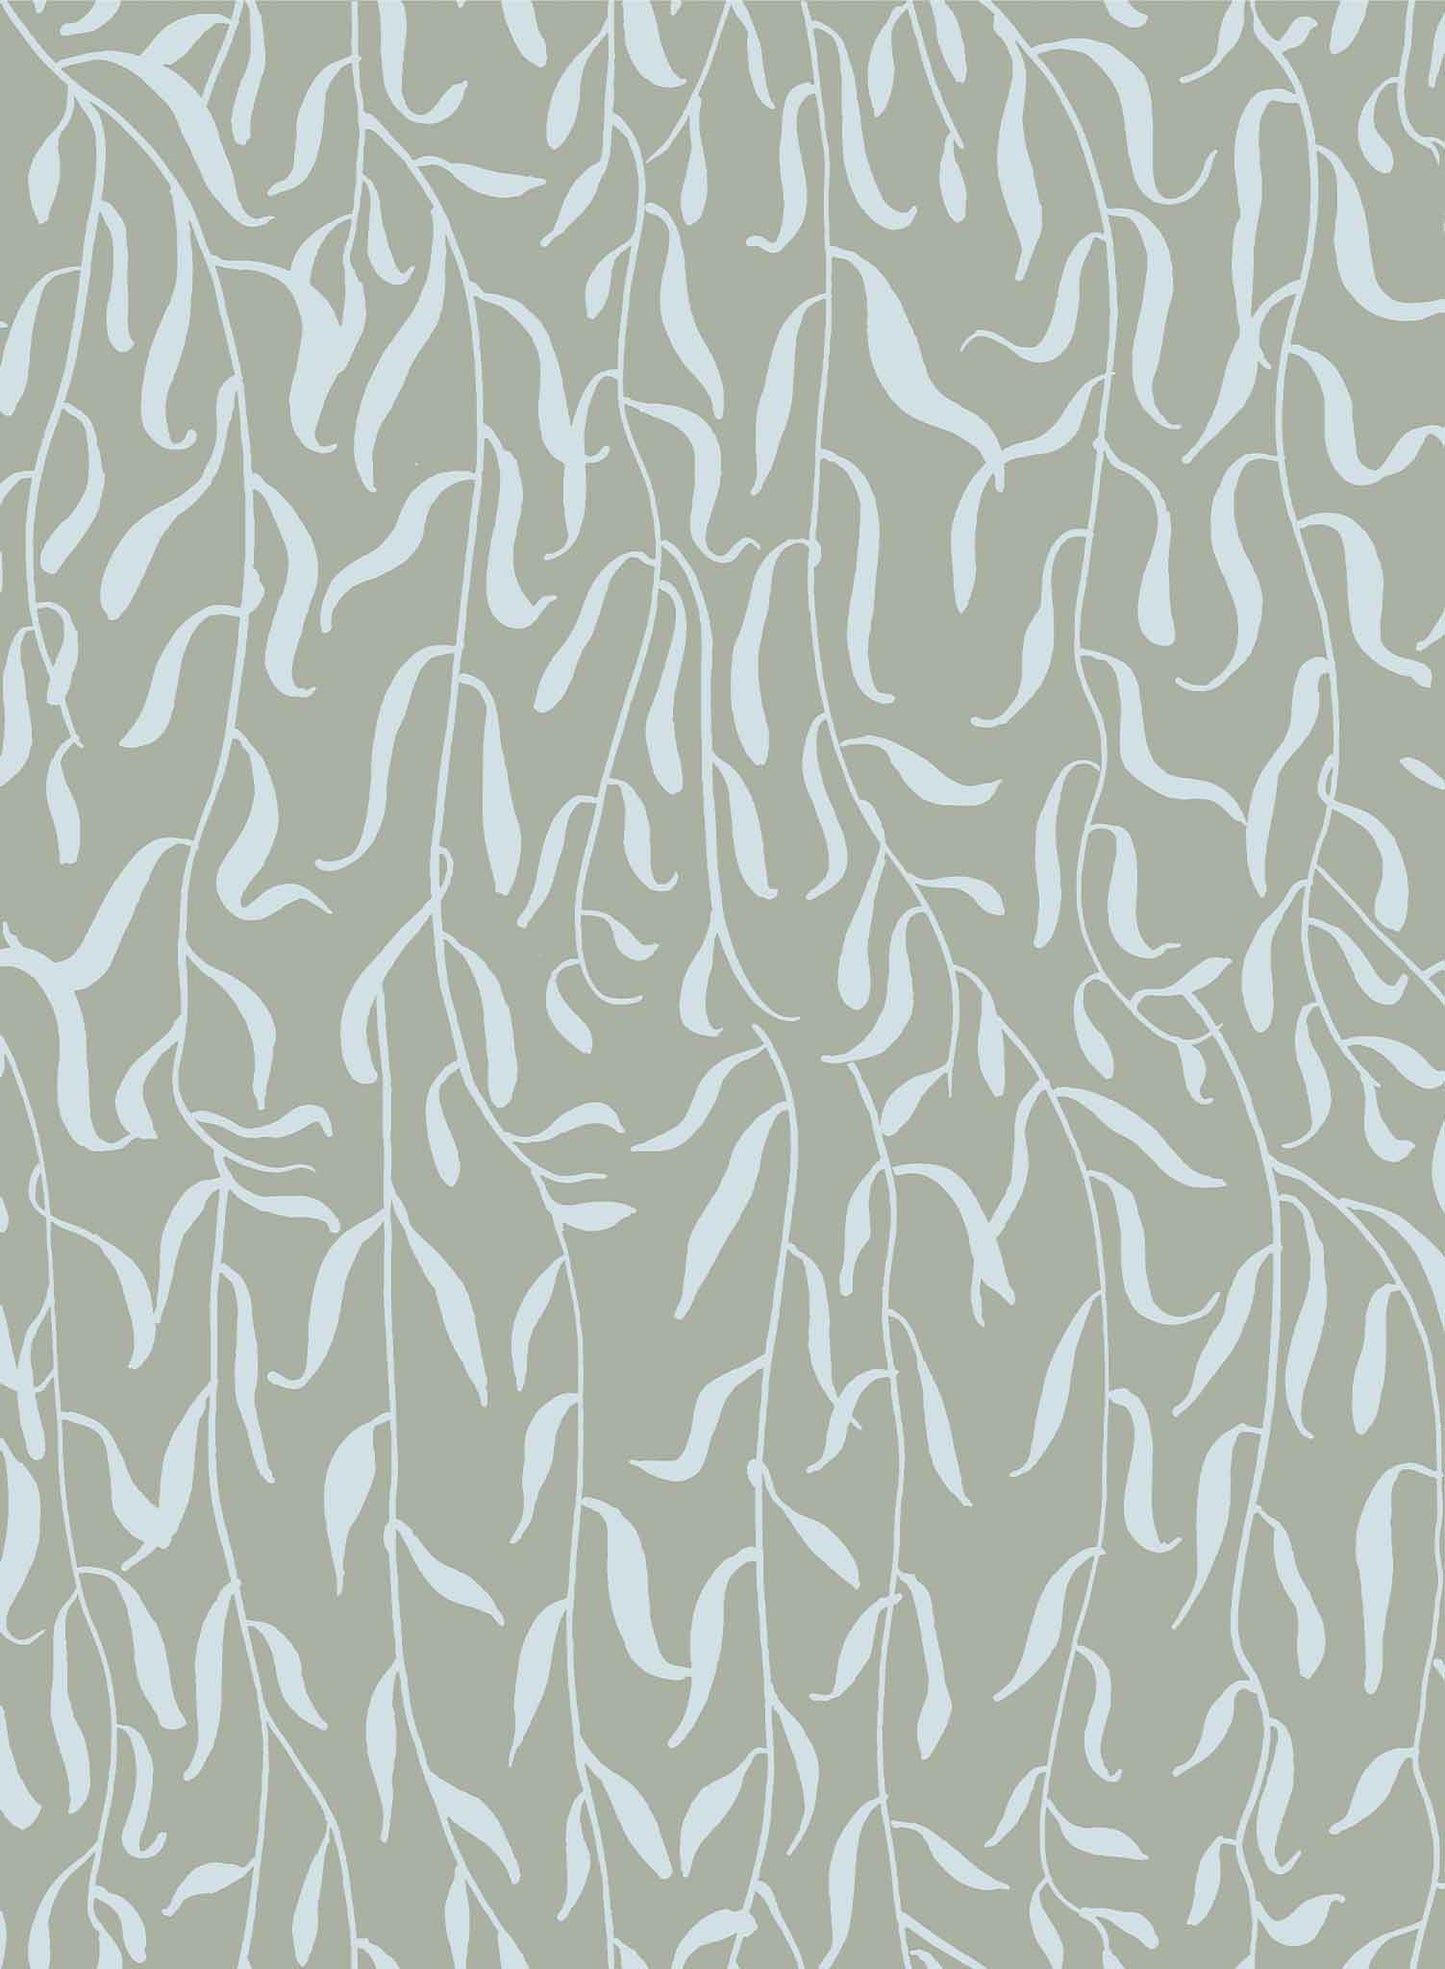 Weeping Willow is a minimalist wallpaper by Opposite Wall of sparse weeping willow branches and their leaves.